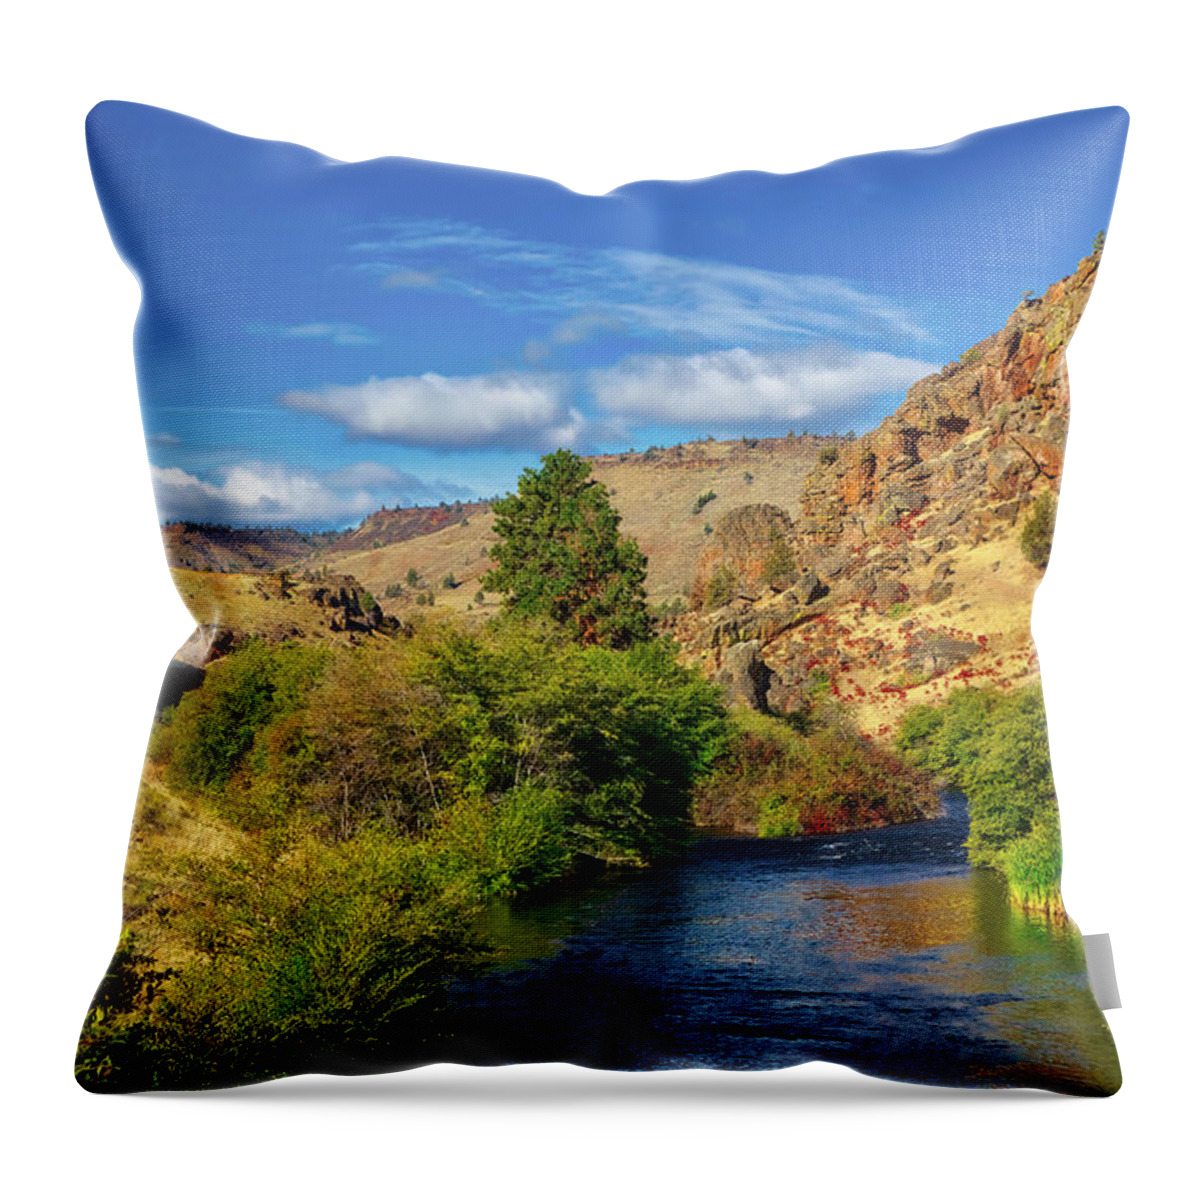 River Throw Pillow featuring the photograph Warm Springs River by Loyd Towe Photography